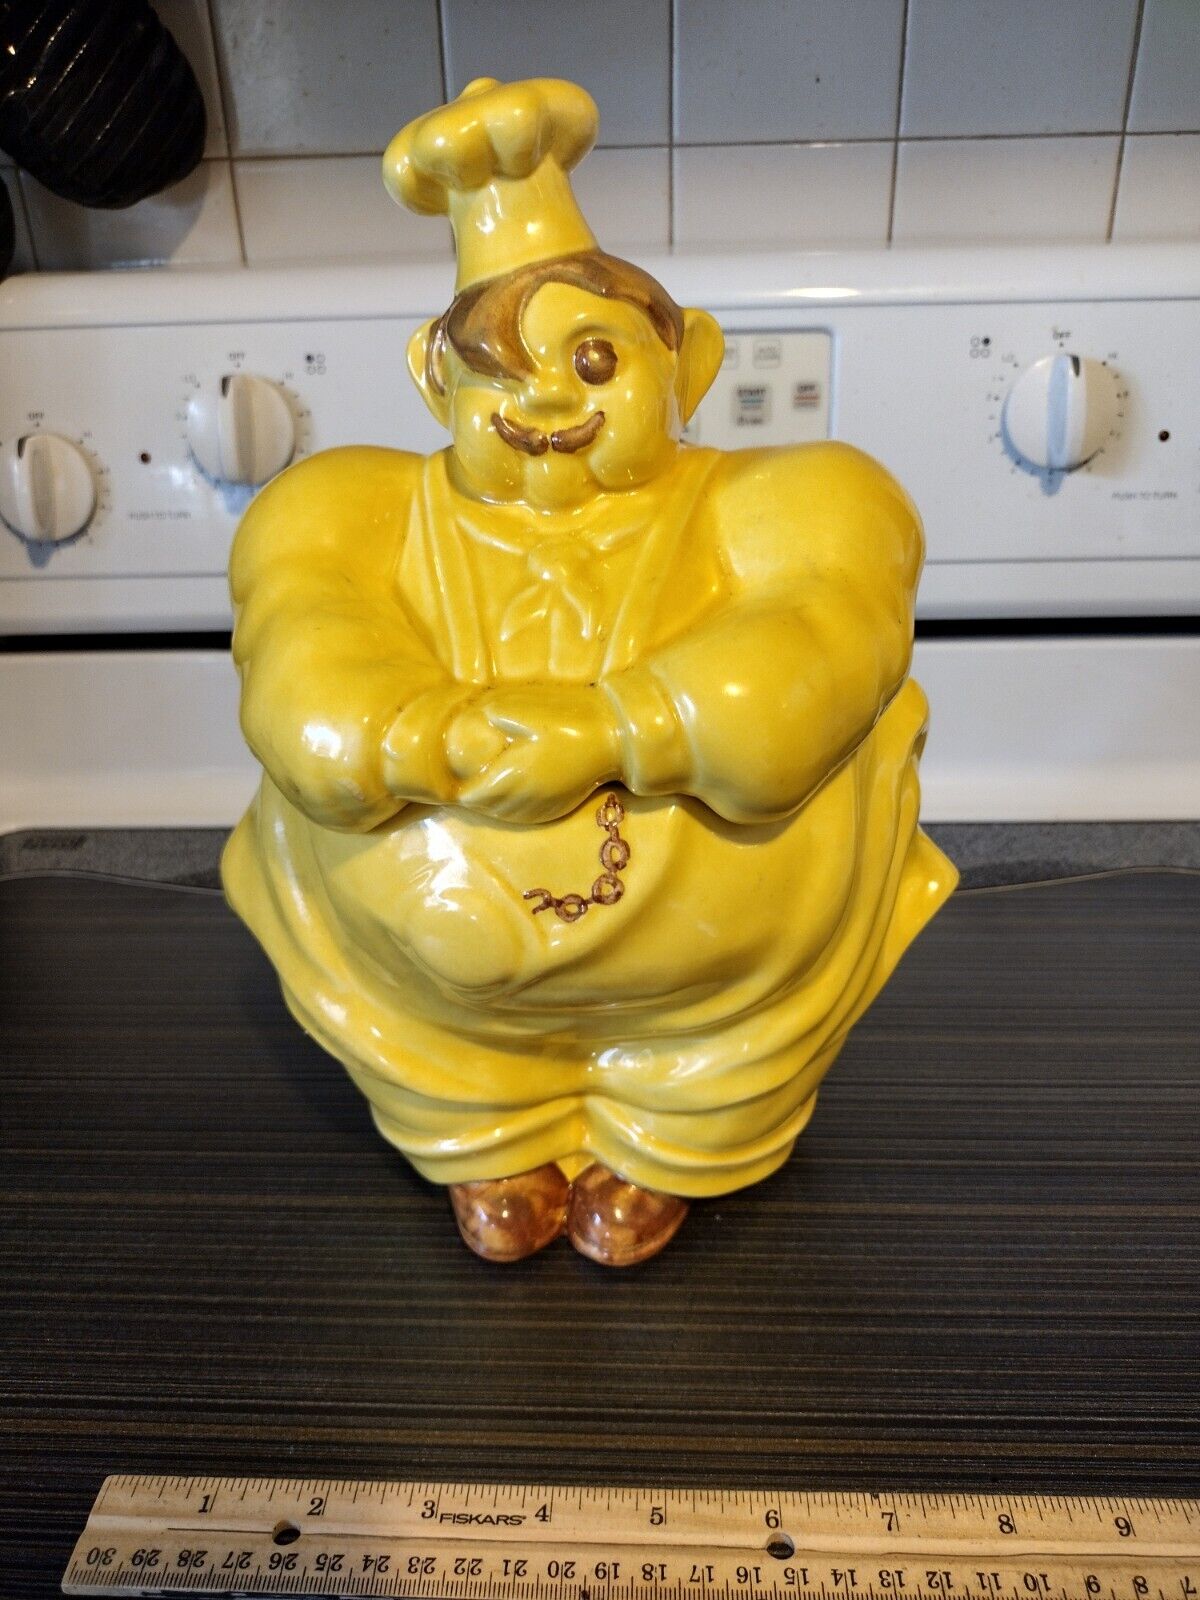 Vintage 1930s Red Wing “Chef Pierre” Cookie Jar Yellow Antique Art Pottery USA